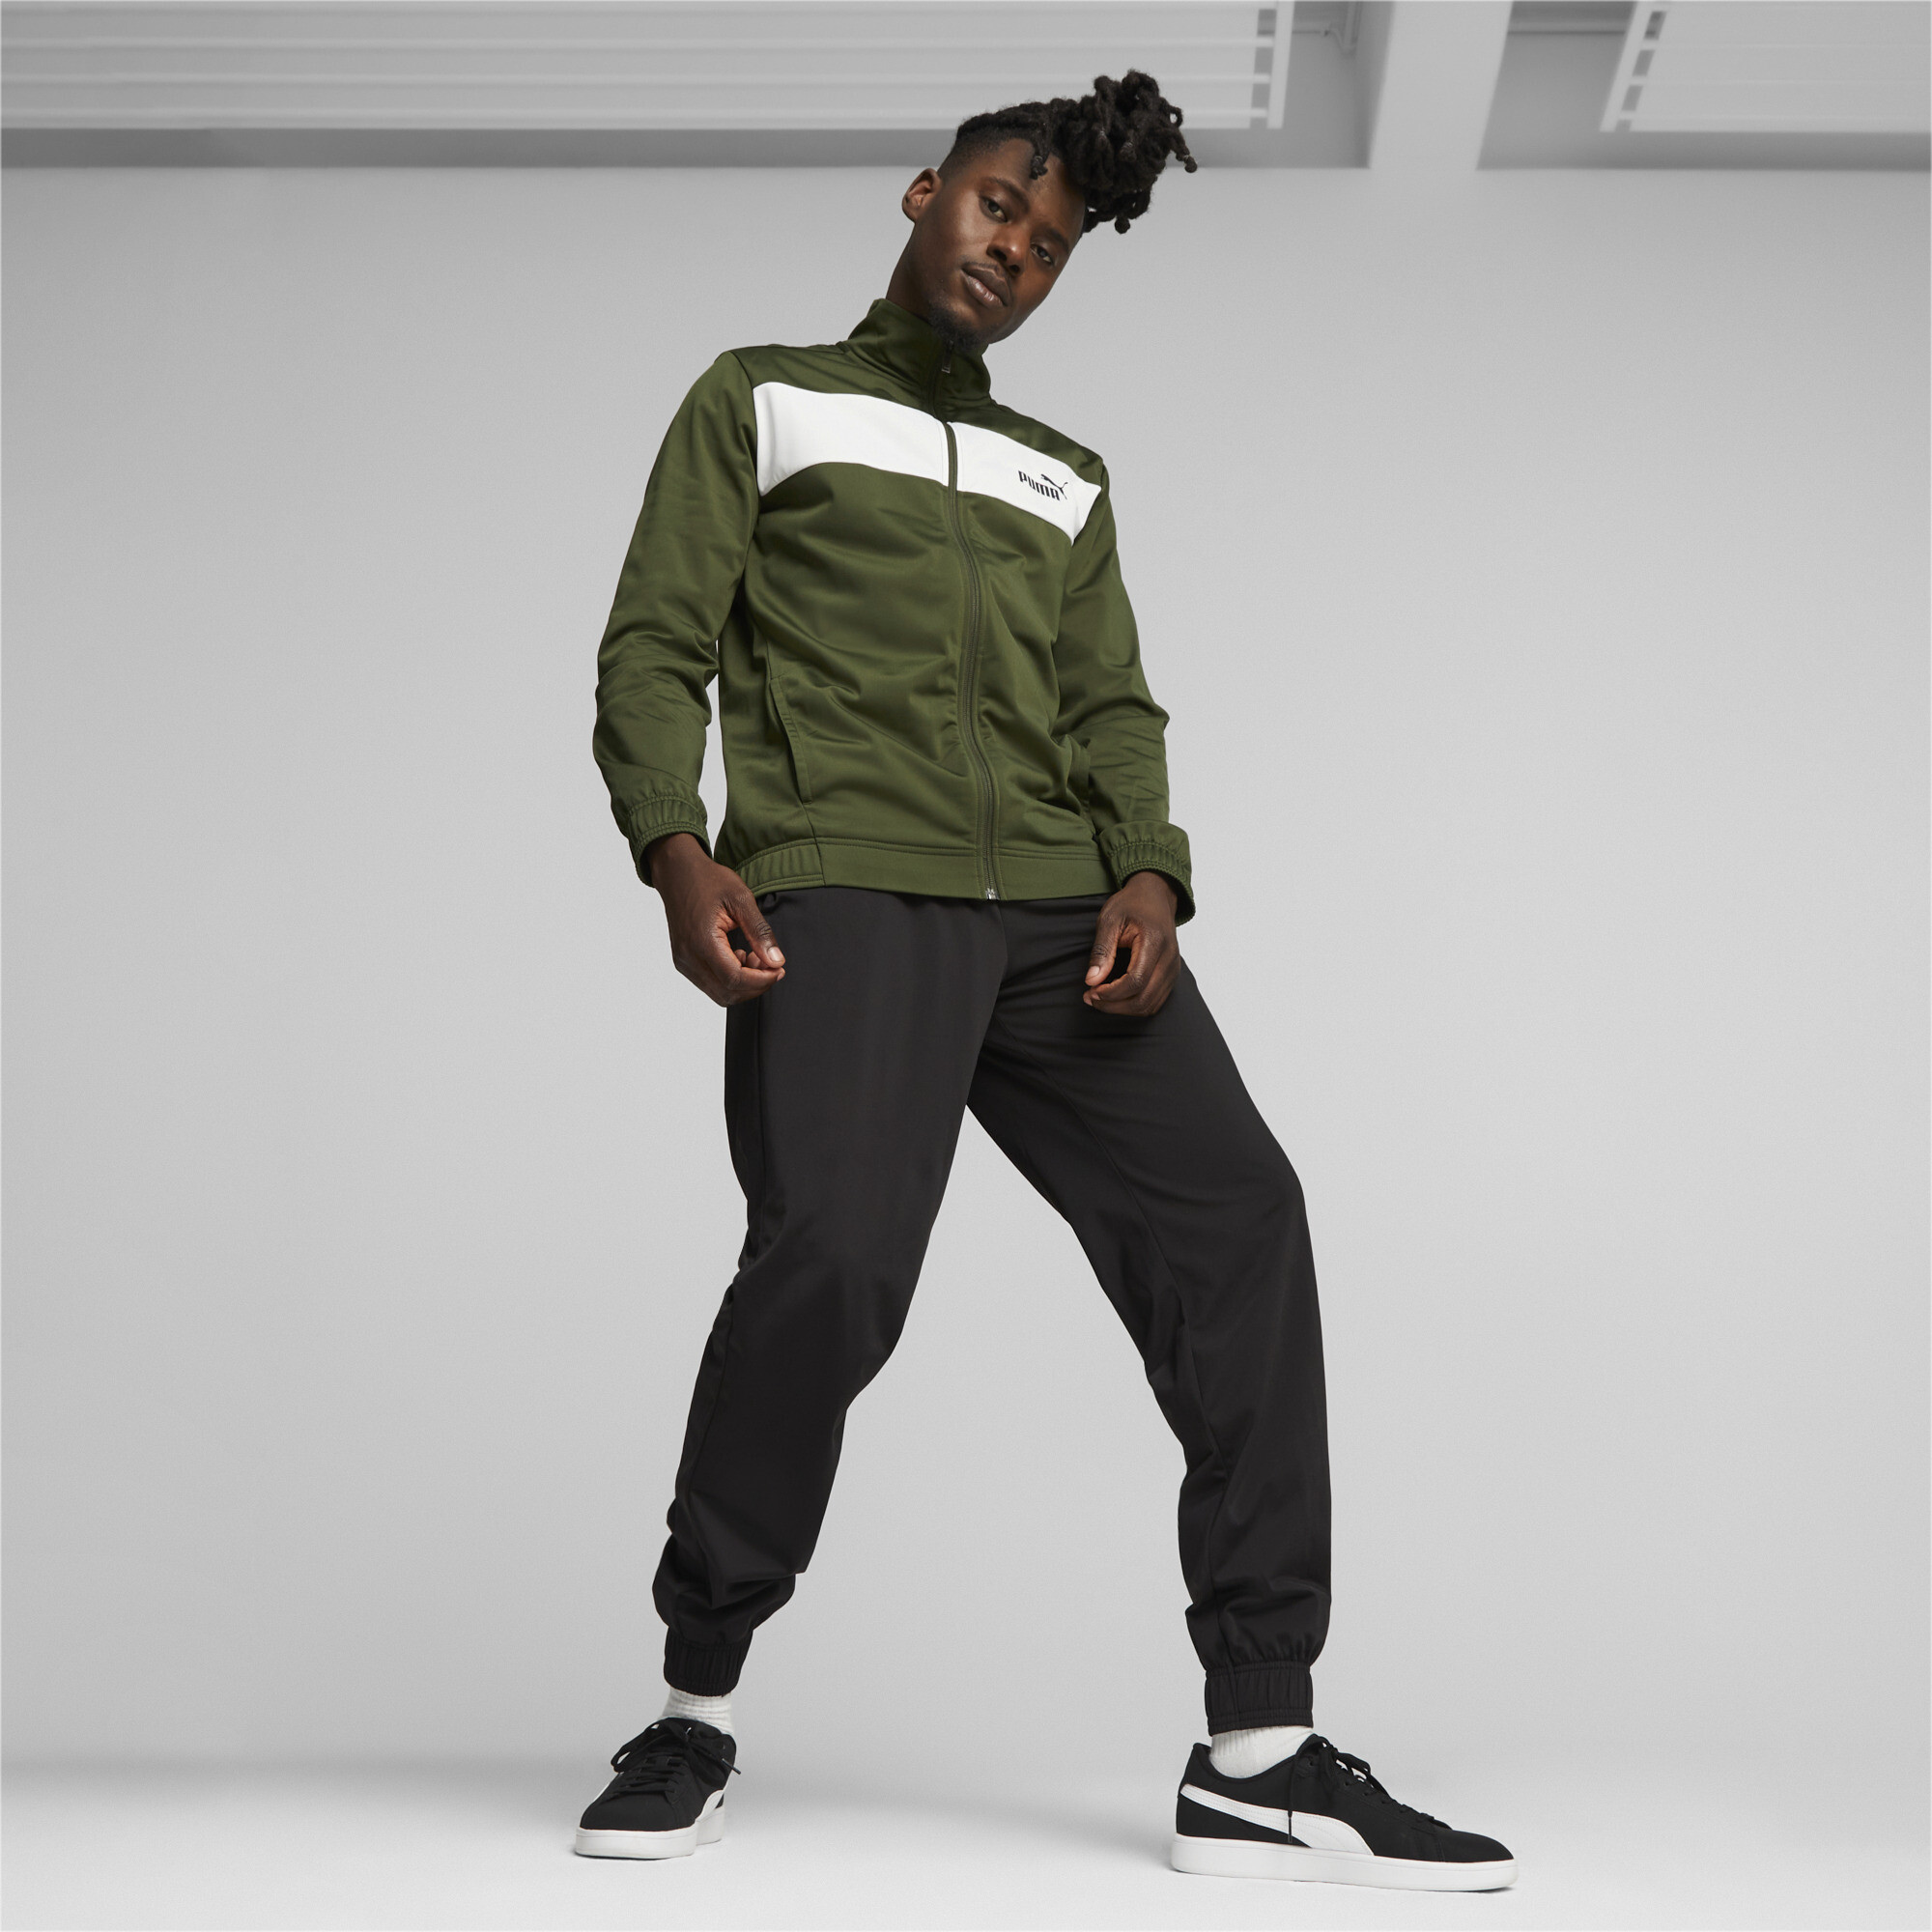 Men's Puma Men's Poly Tracksuit, Green, Size S, Clothing